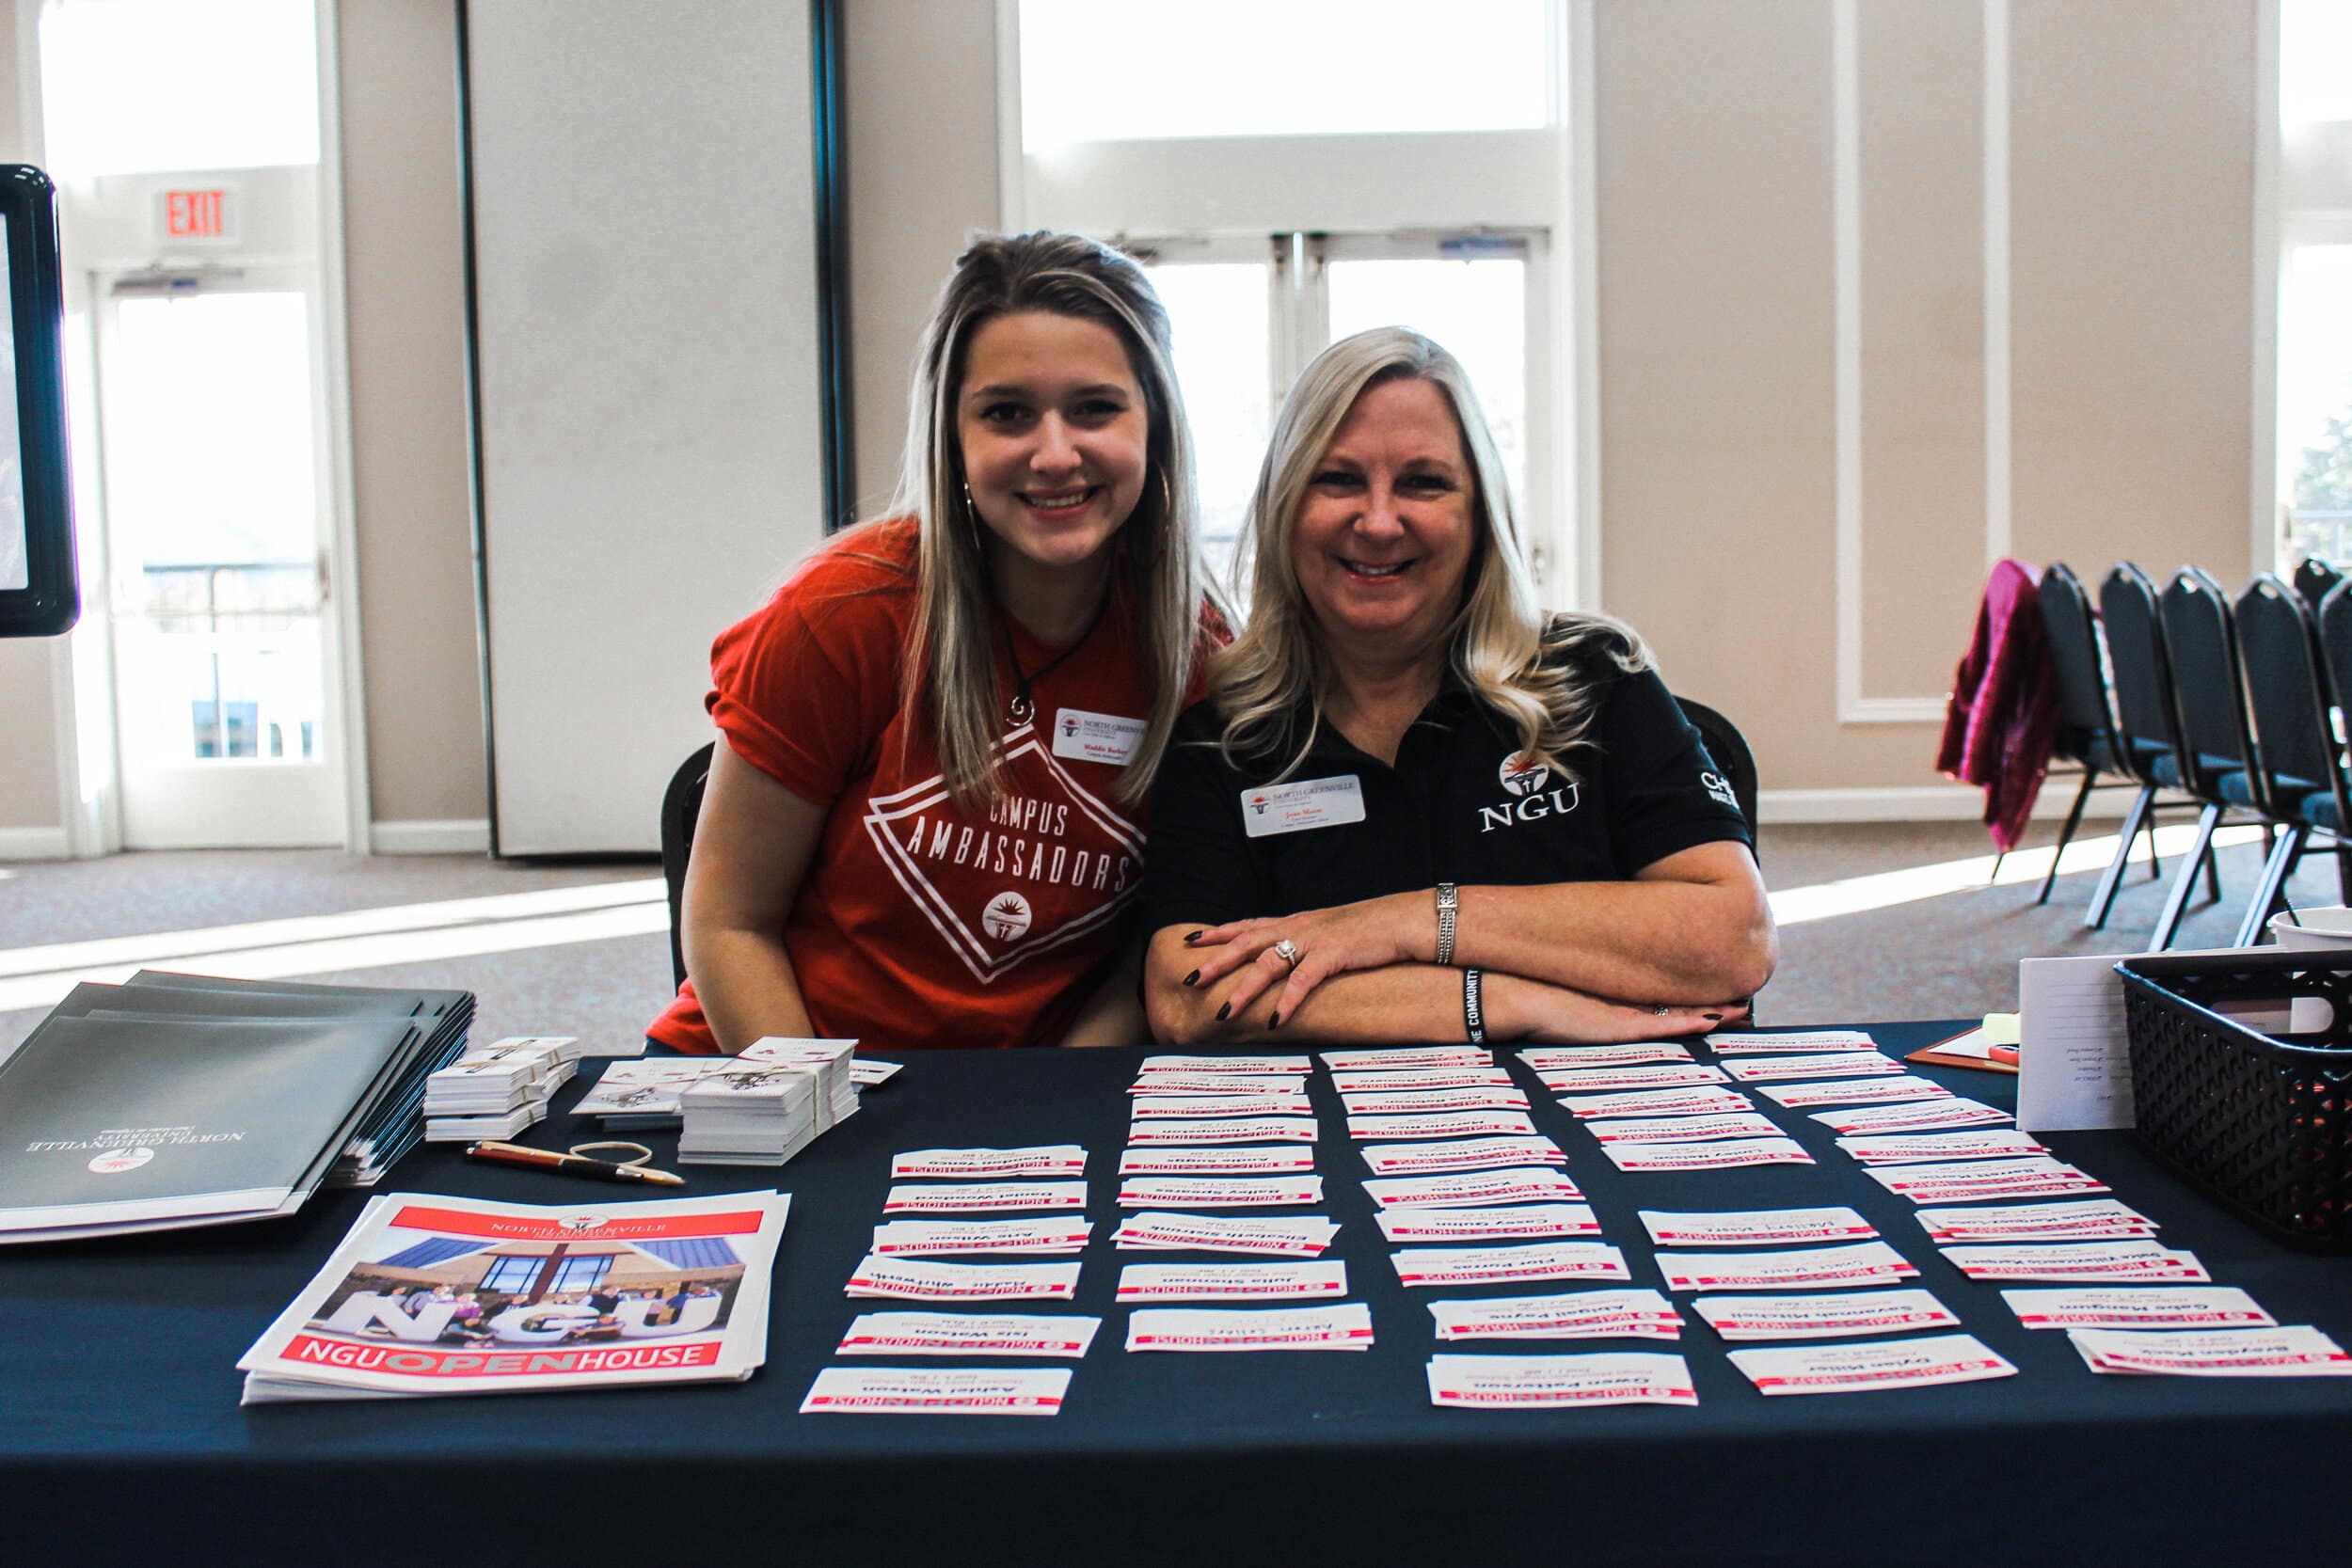 Maddie Barber (freshman) and Joan Moon (Campus Ambassador Advisor) handing out name tags to prospective students.